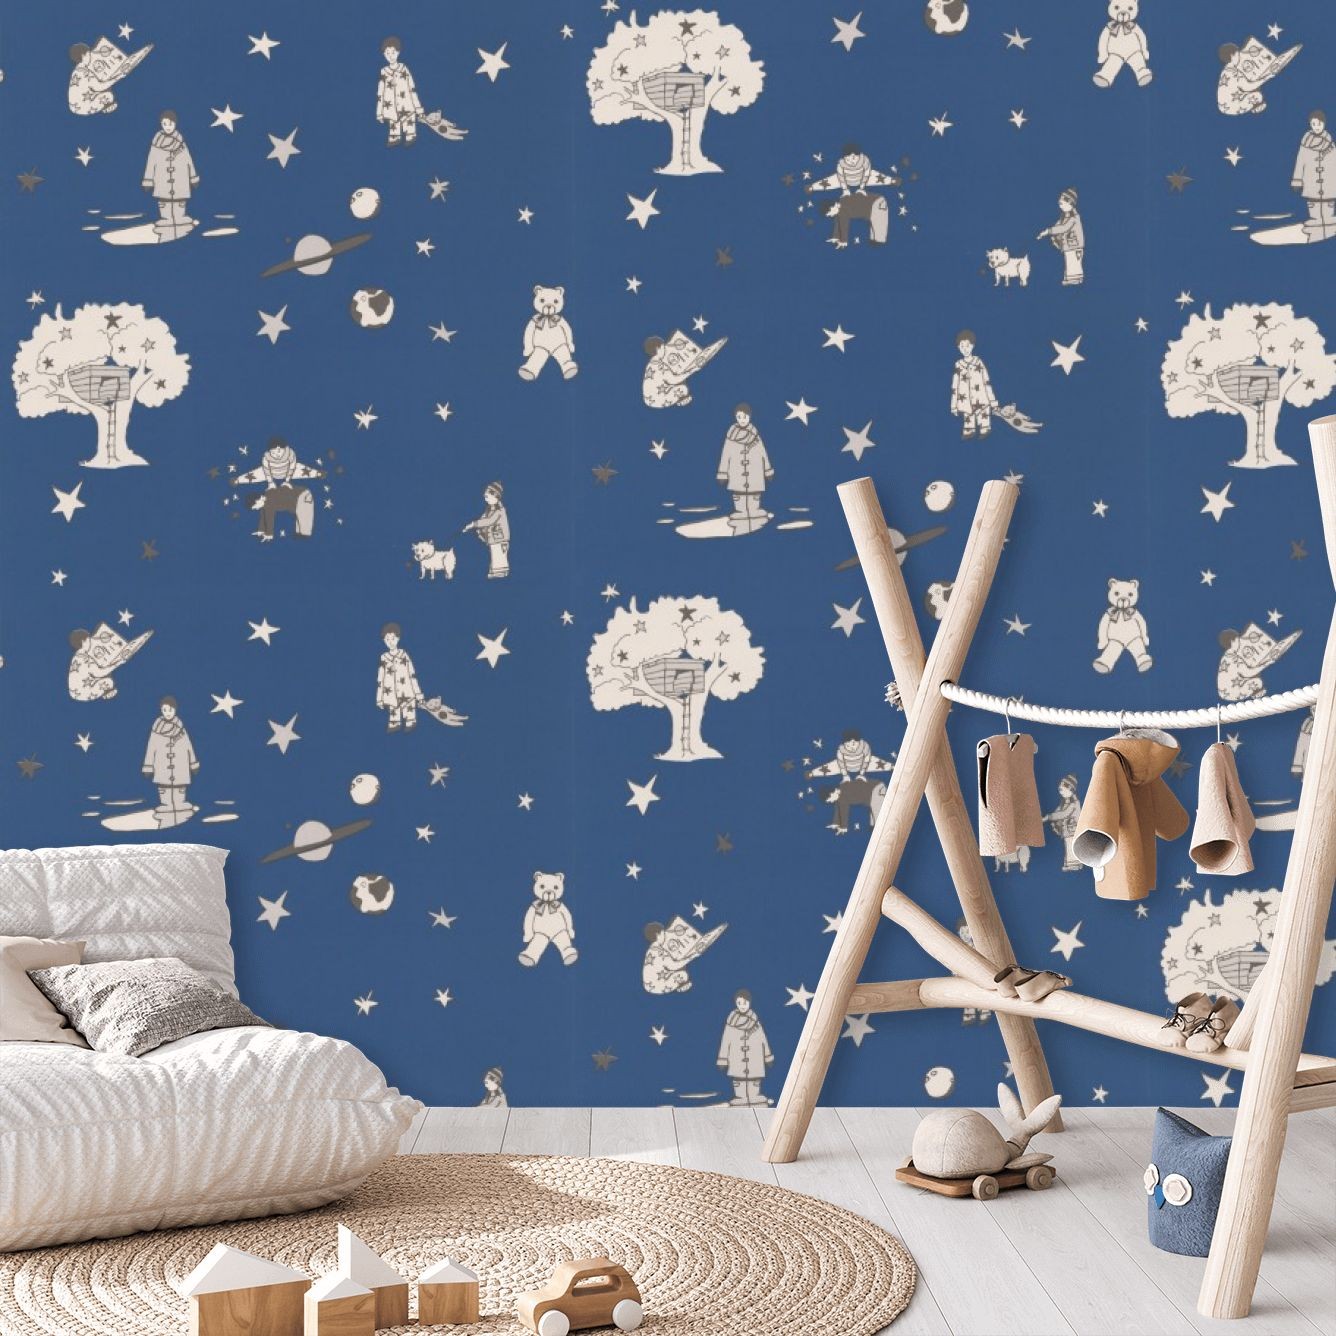 Once Upon a Star Wallpaper - Navy and White - By Katie Bourne Interiors -  B6 Once